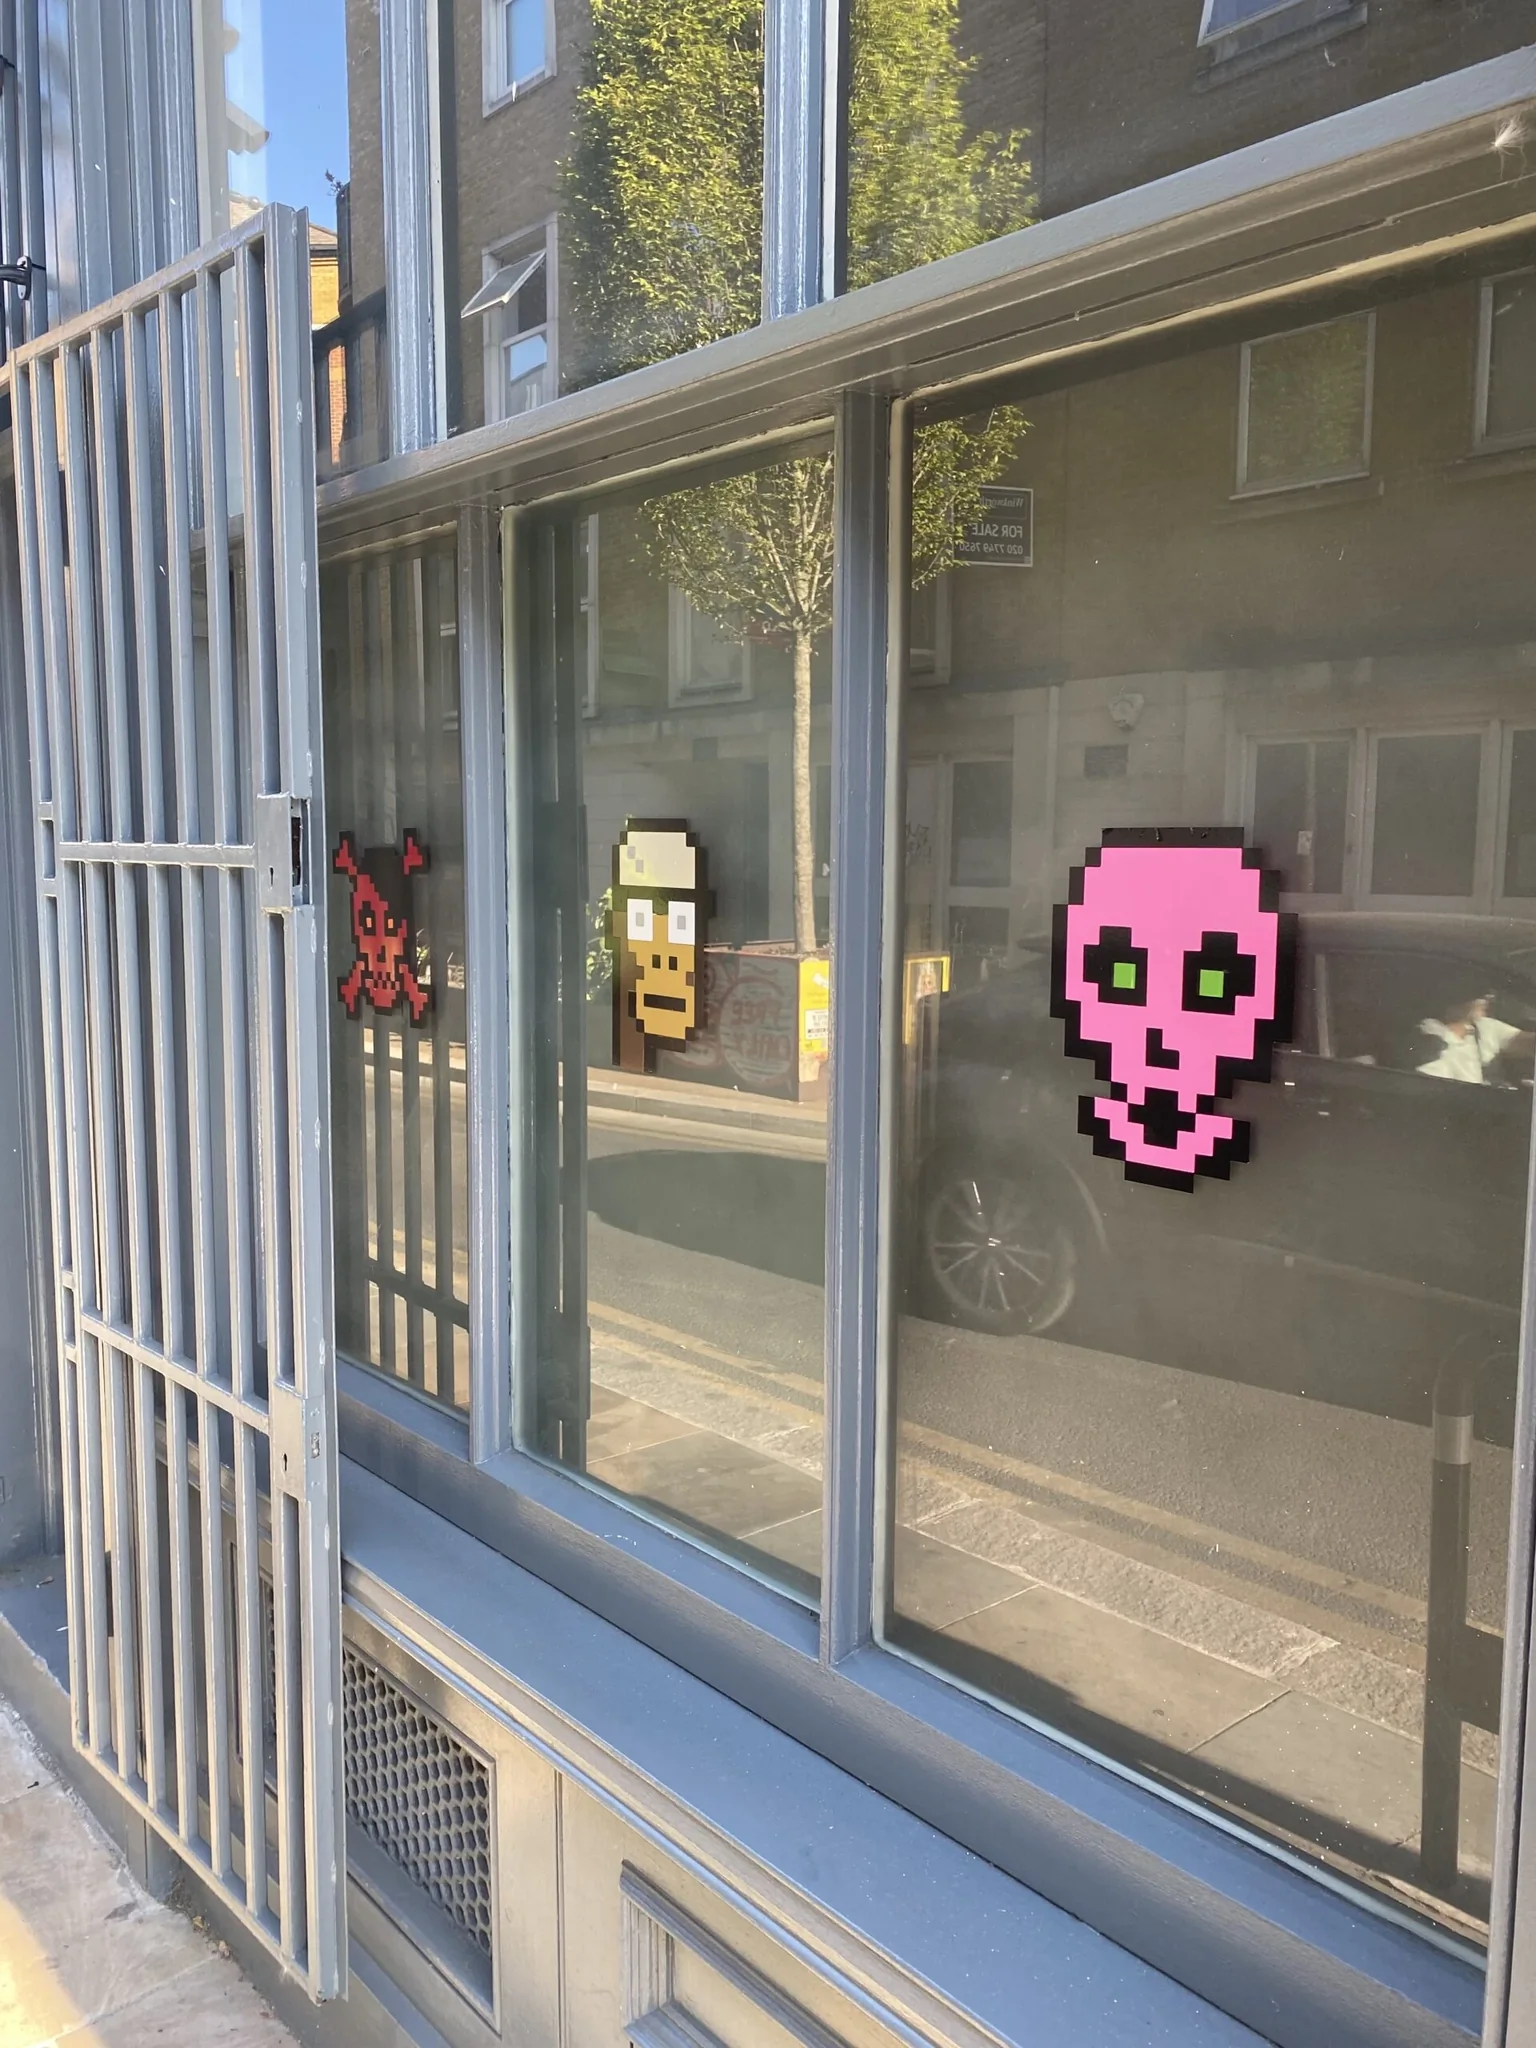 Outside of a shop with tinted windows and images of an Ape CryptoPunk NFT and a Cryptoskull NFT.